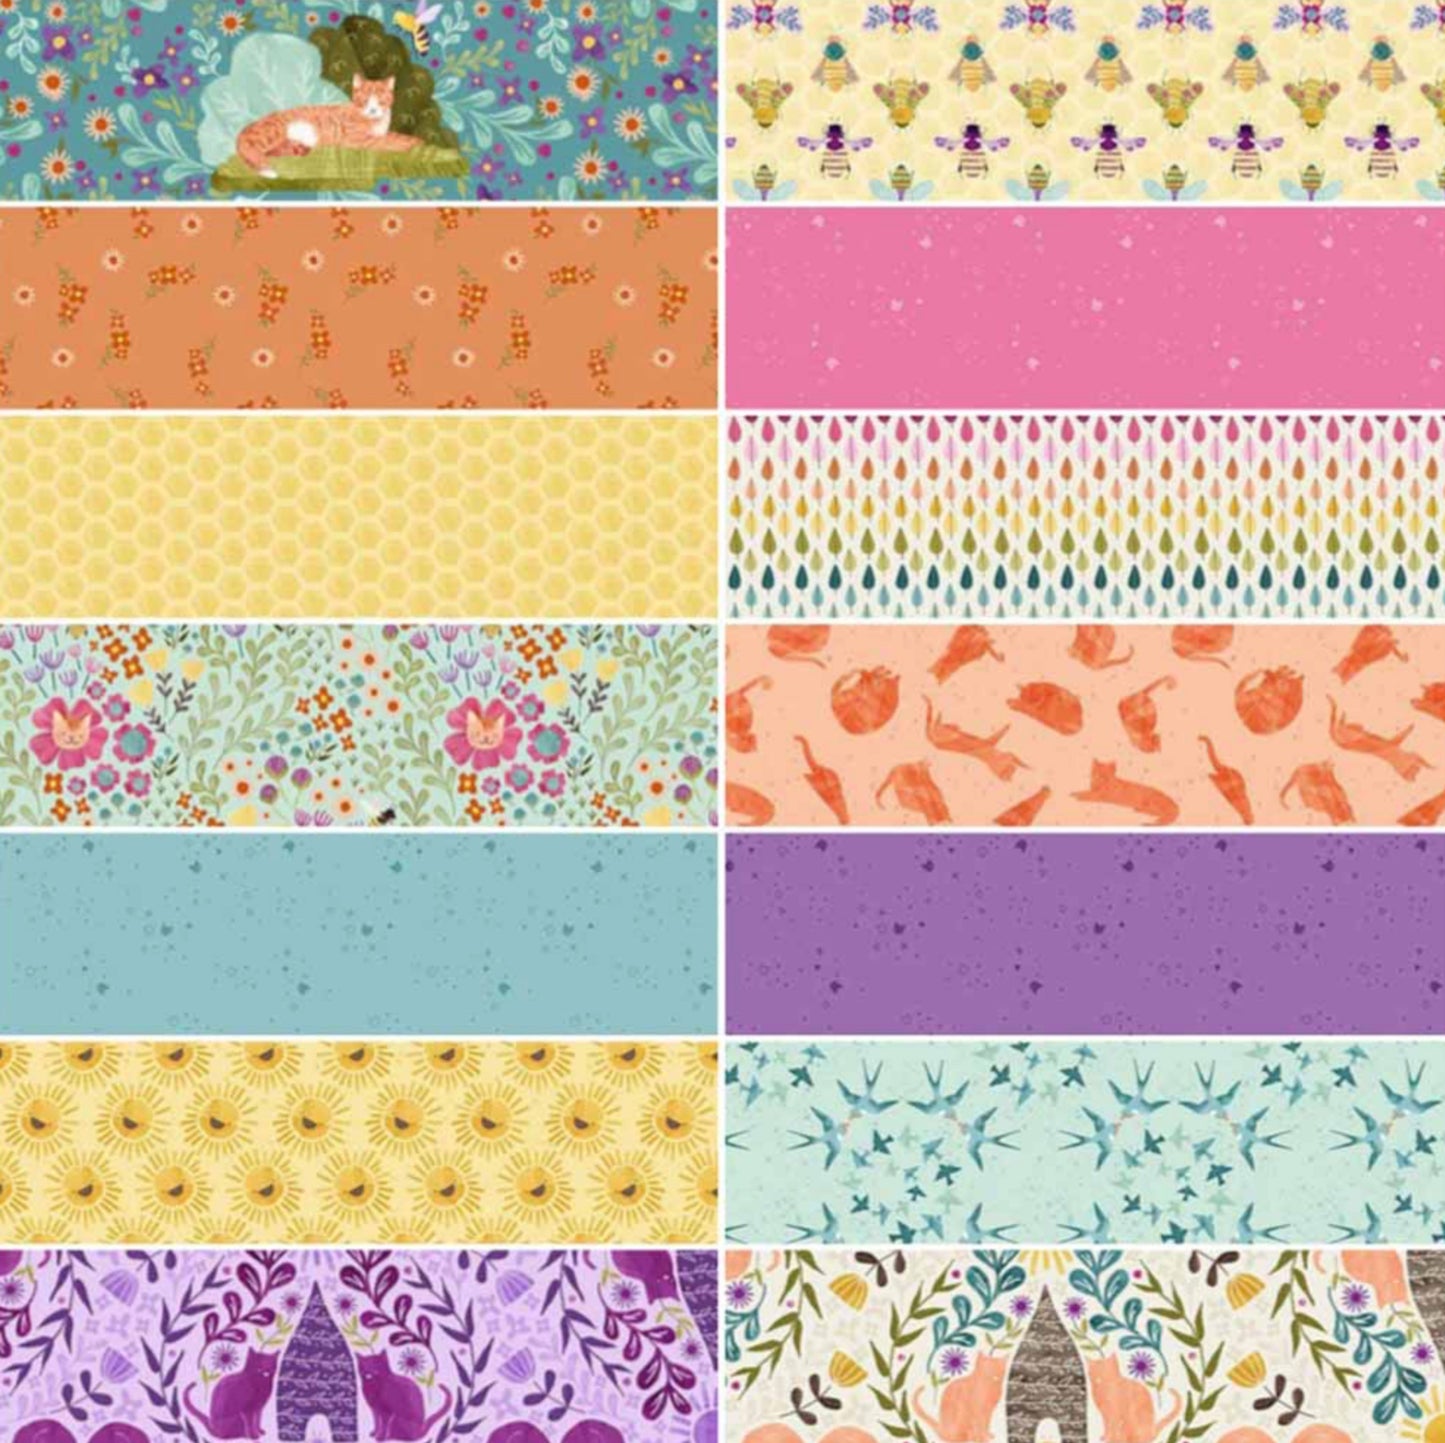 Curiosity Blooms Layer Cake Fabrics. From the Curious Garden Collection by Pammie Jane for Dear Stella Fabrics. We have additional fabrics by the yard from this collection, which is purrfect for cat lovers everywhere!